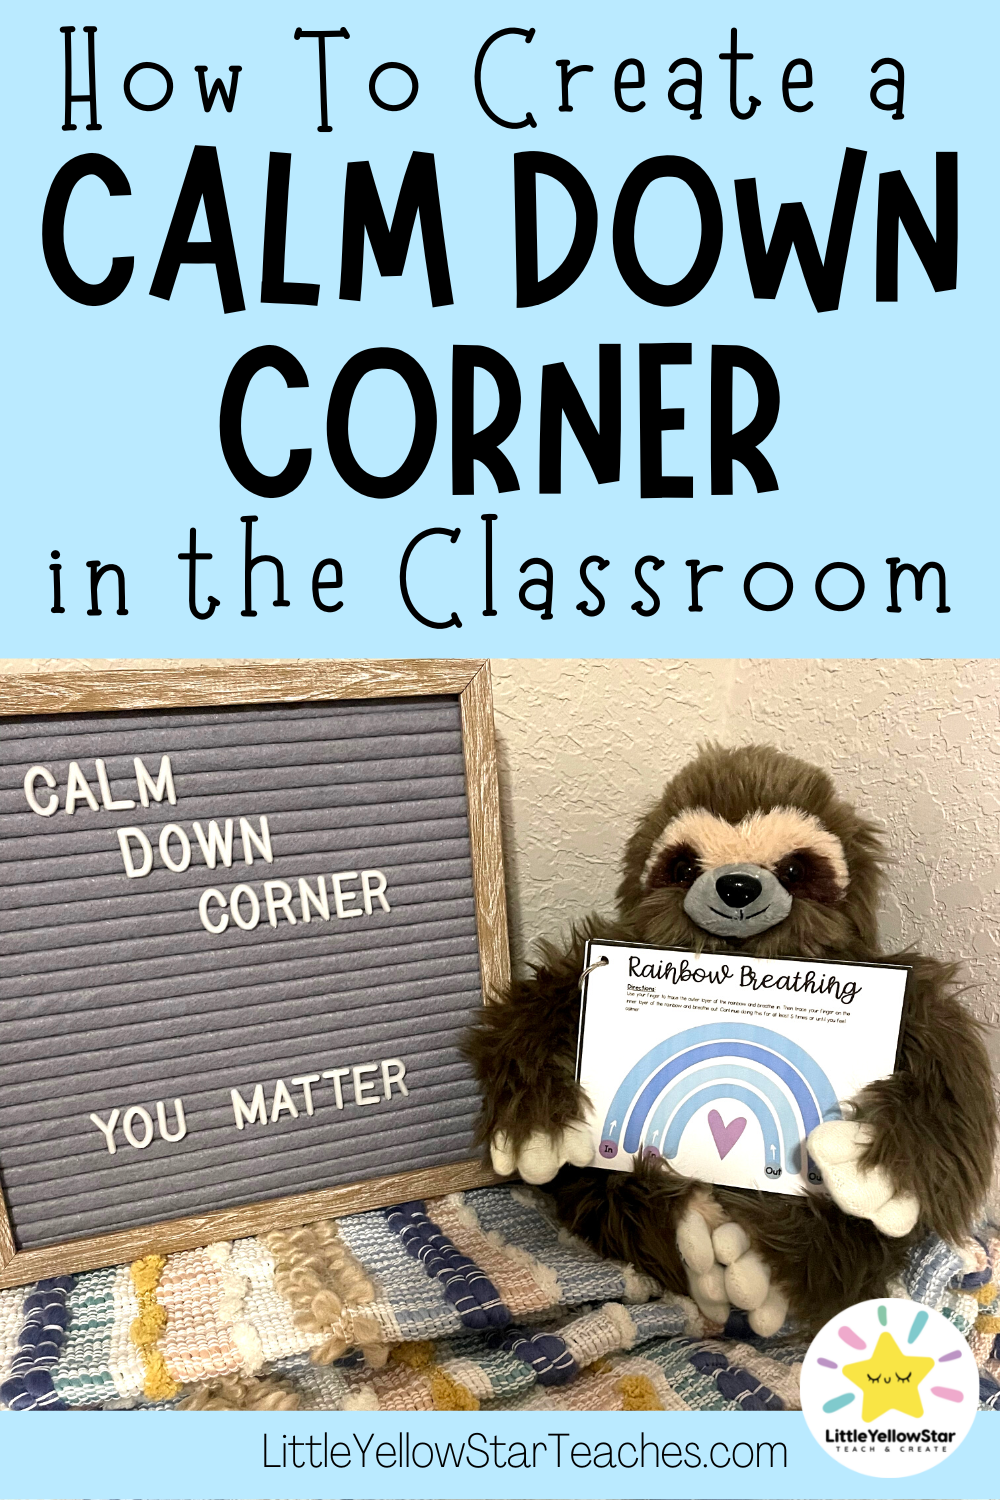 How To Create A Calm Down Corner in The Classroom